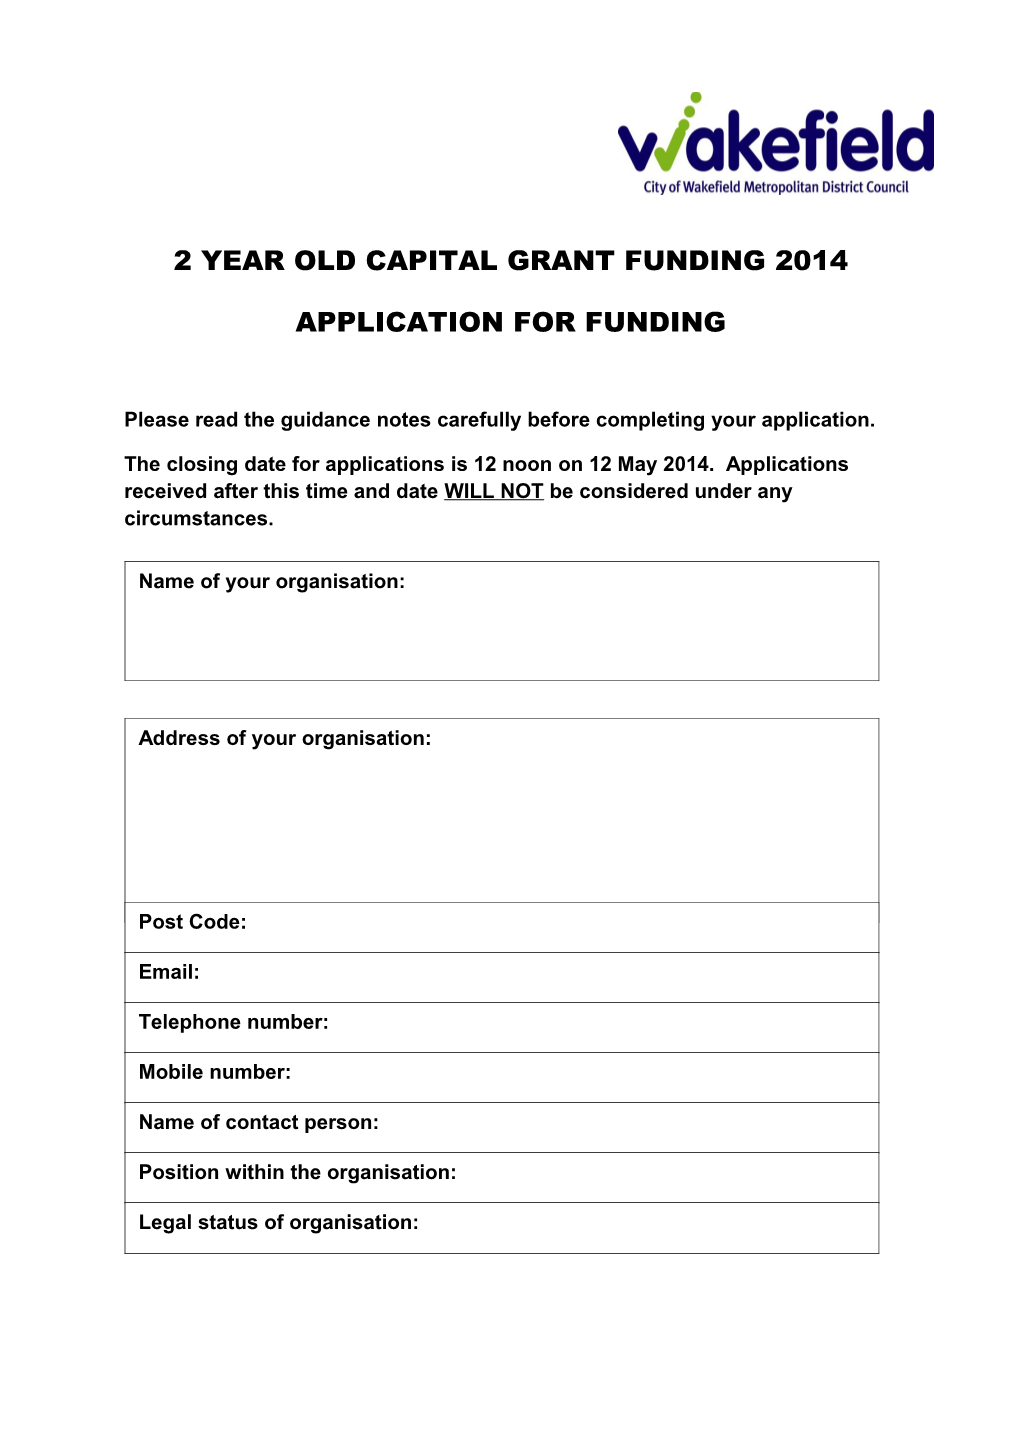 2 Year Old Capital Grant Funding 2014